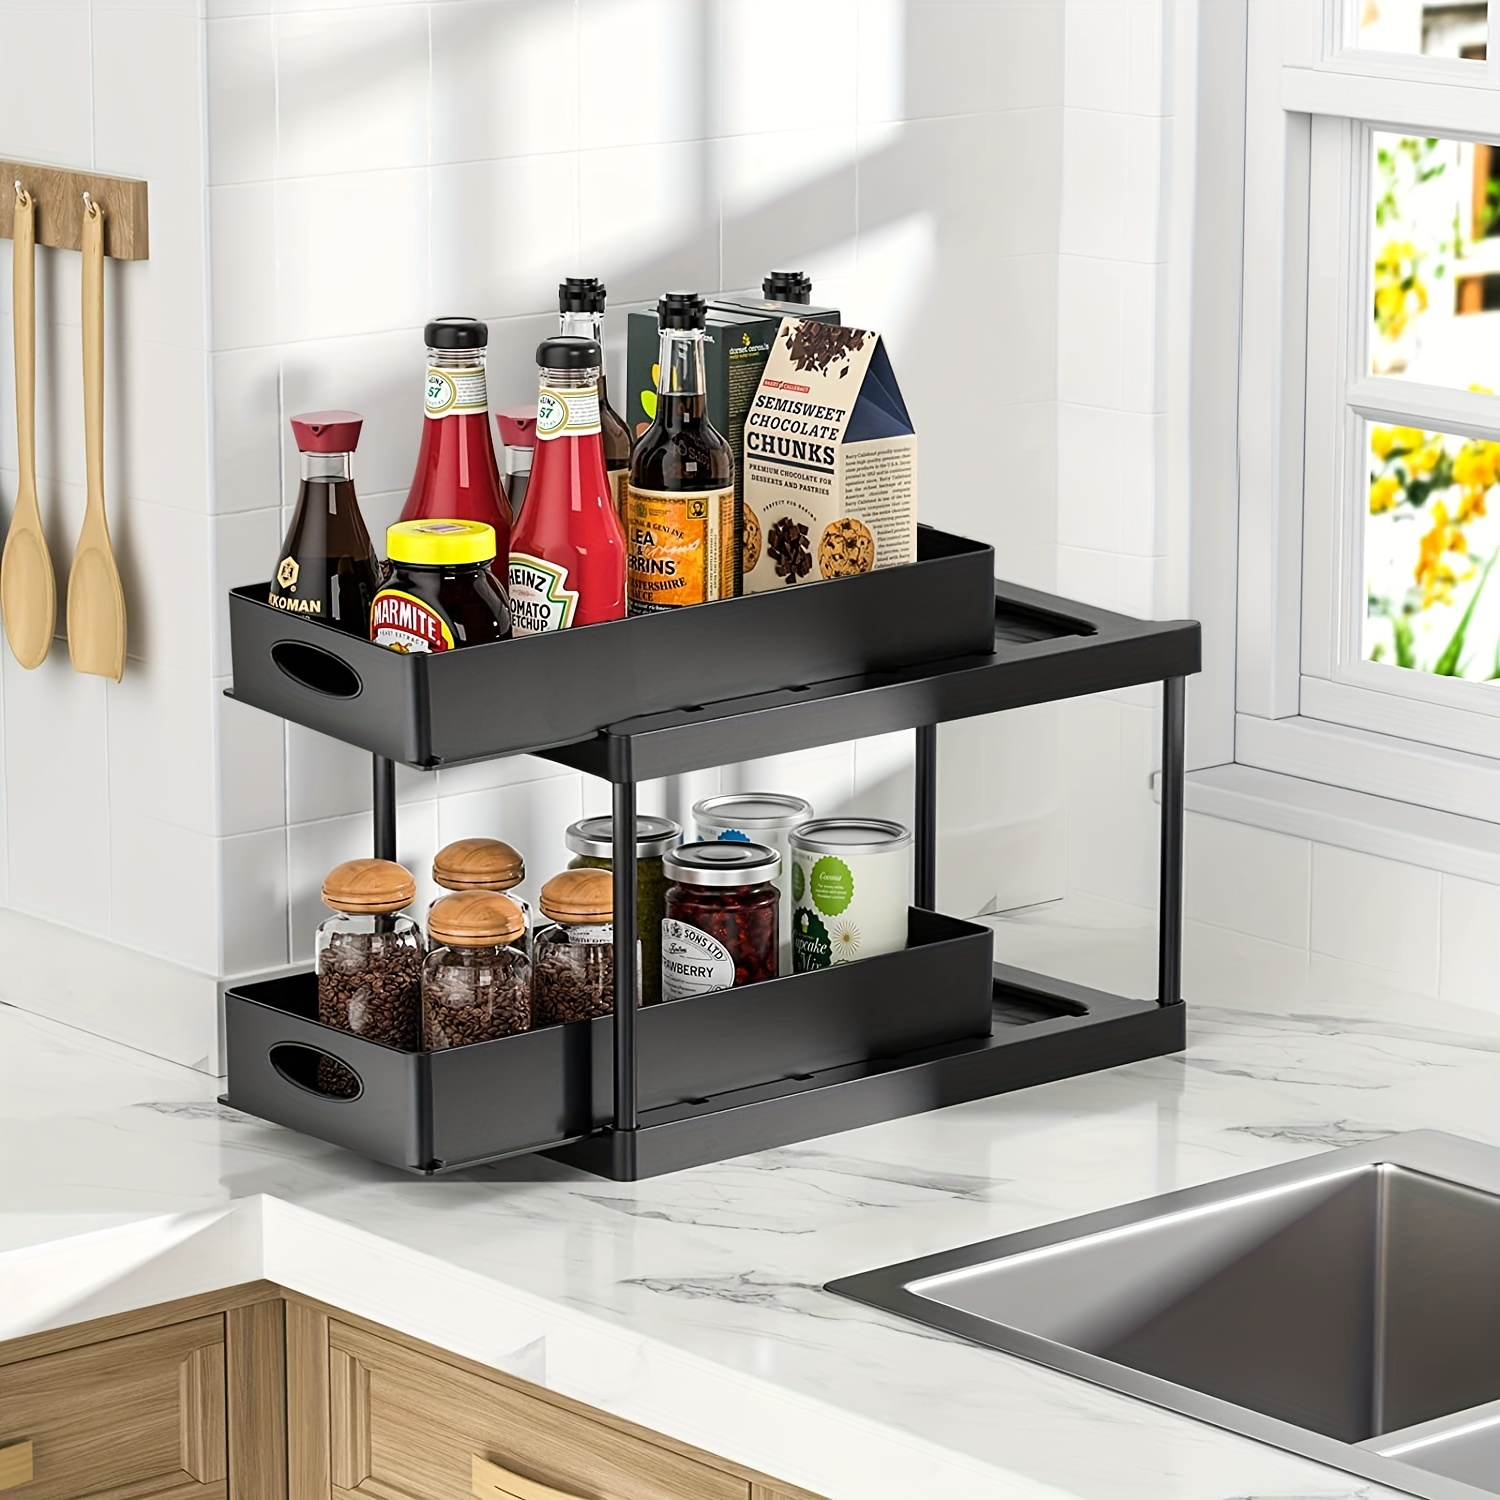 Bathroom Organizer Under Sink Two Tier Pull Out Organizer With